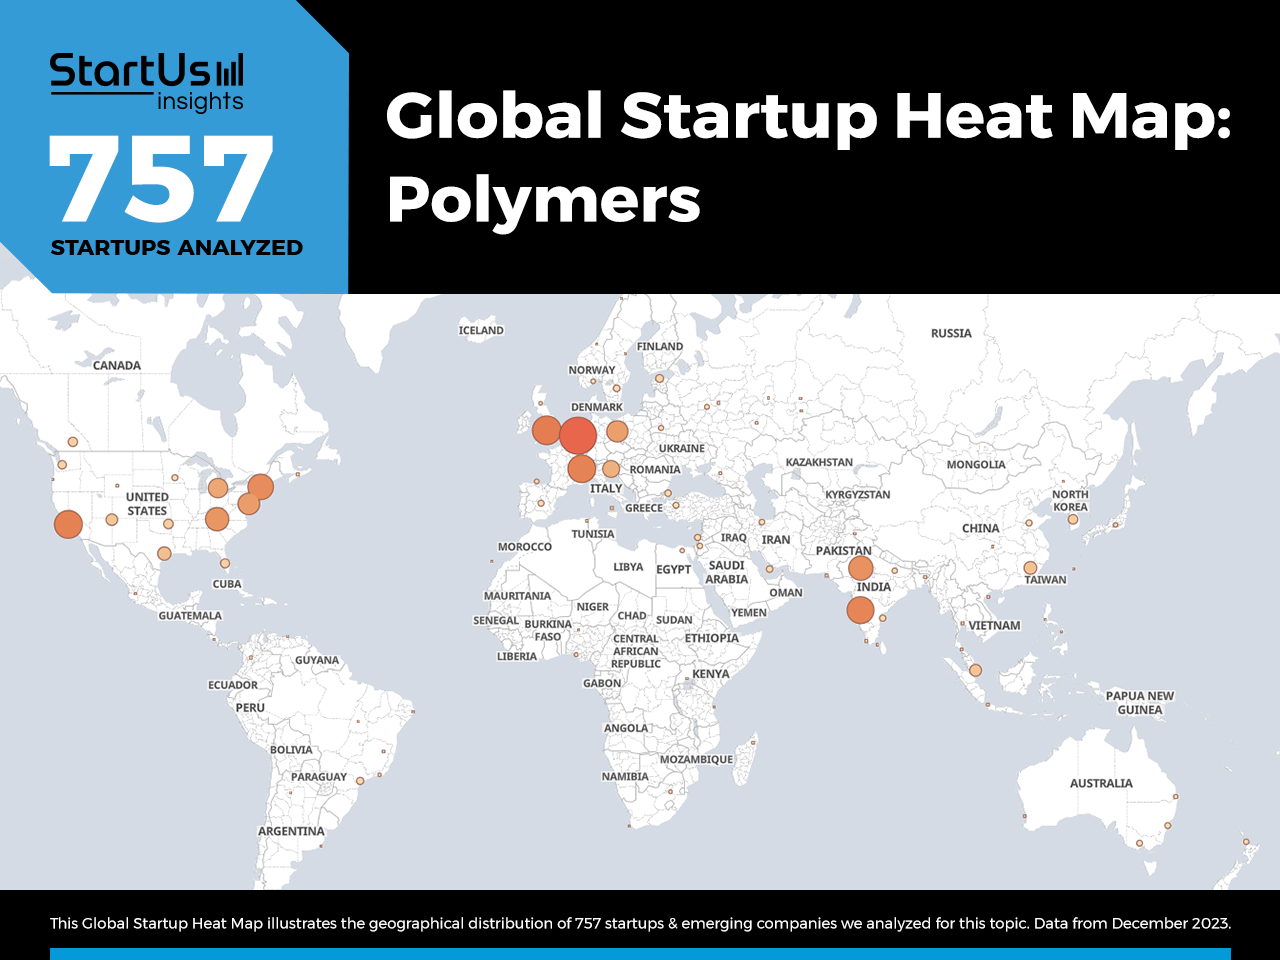 Polymer-Industry-Startups-TrendResearch-Heat-Map-StartUs-Insights-noresize